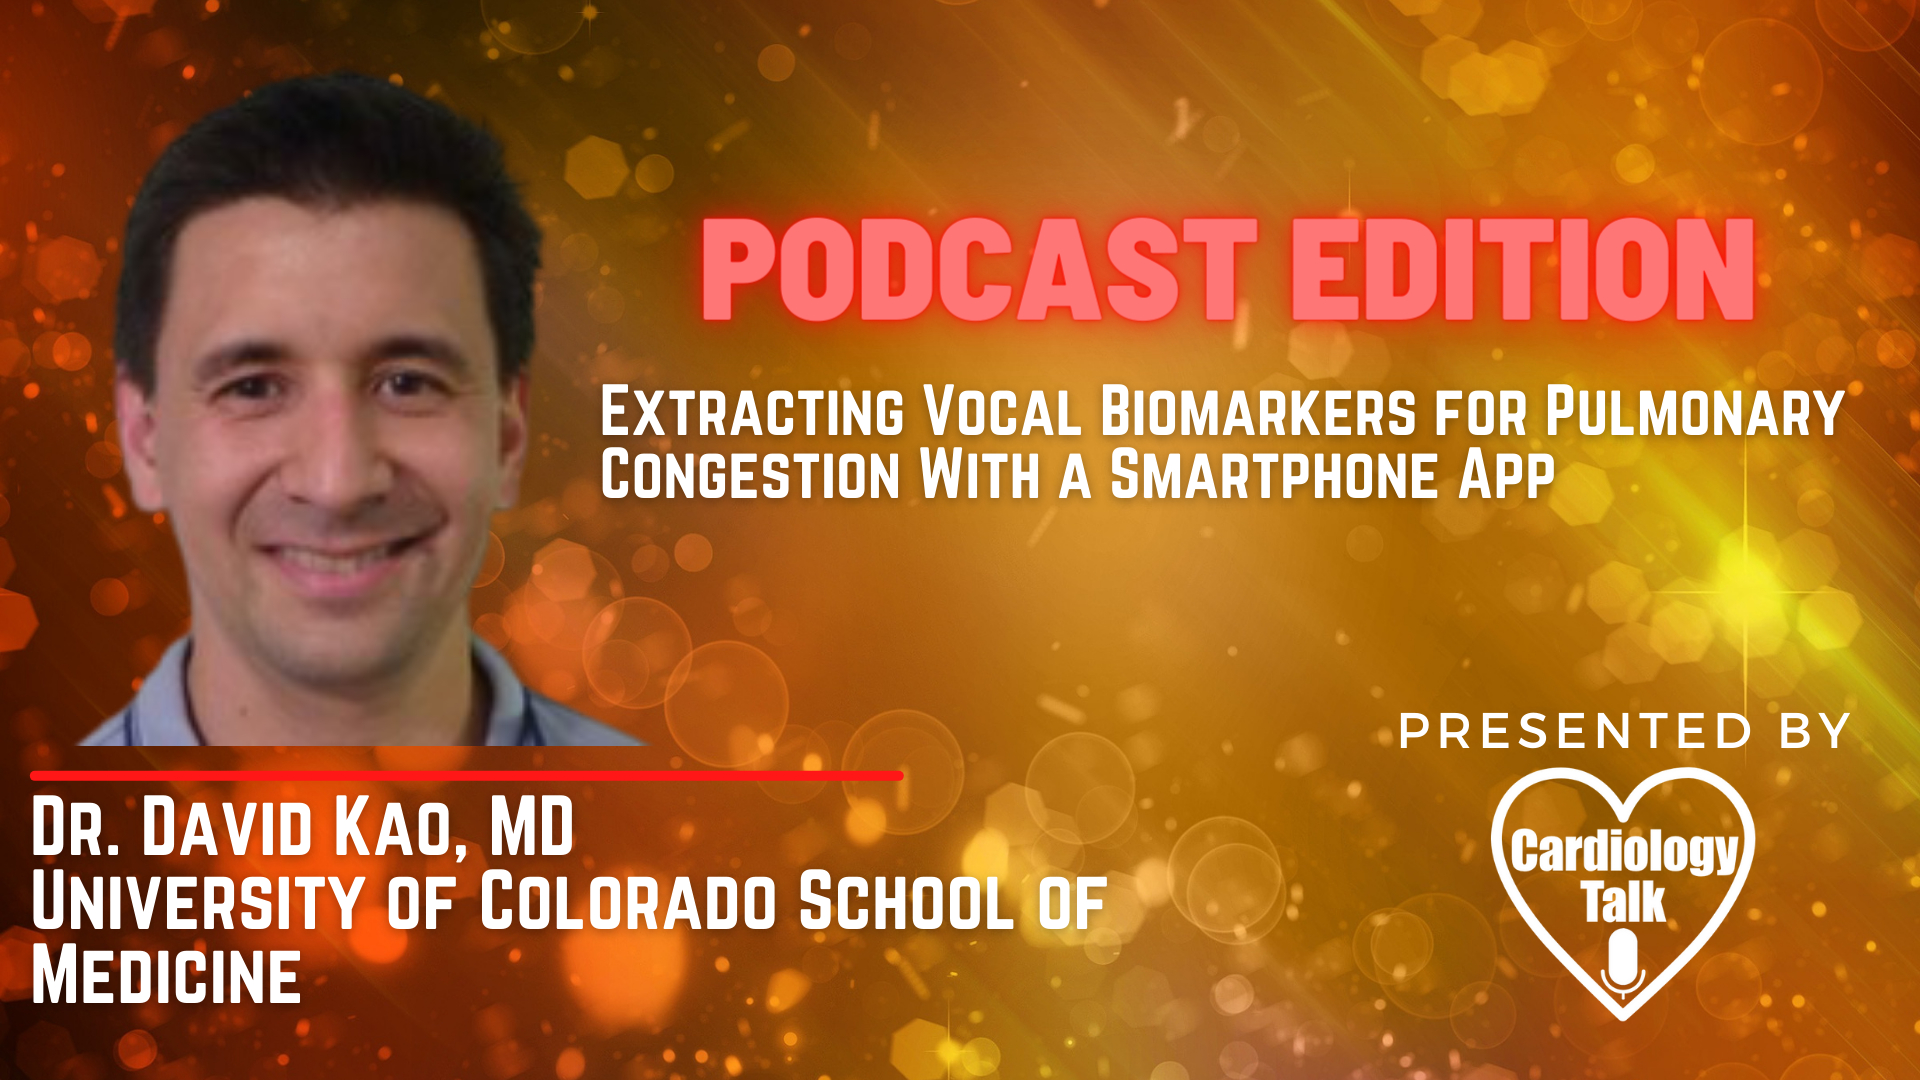 Dr. David P. Kao, MD- Extracting Vocal Biomarkers for Pulmonary Congestion With a Smartphone App